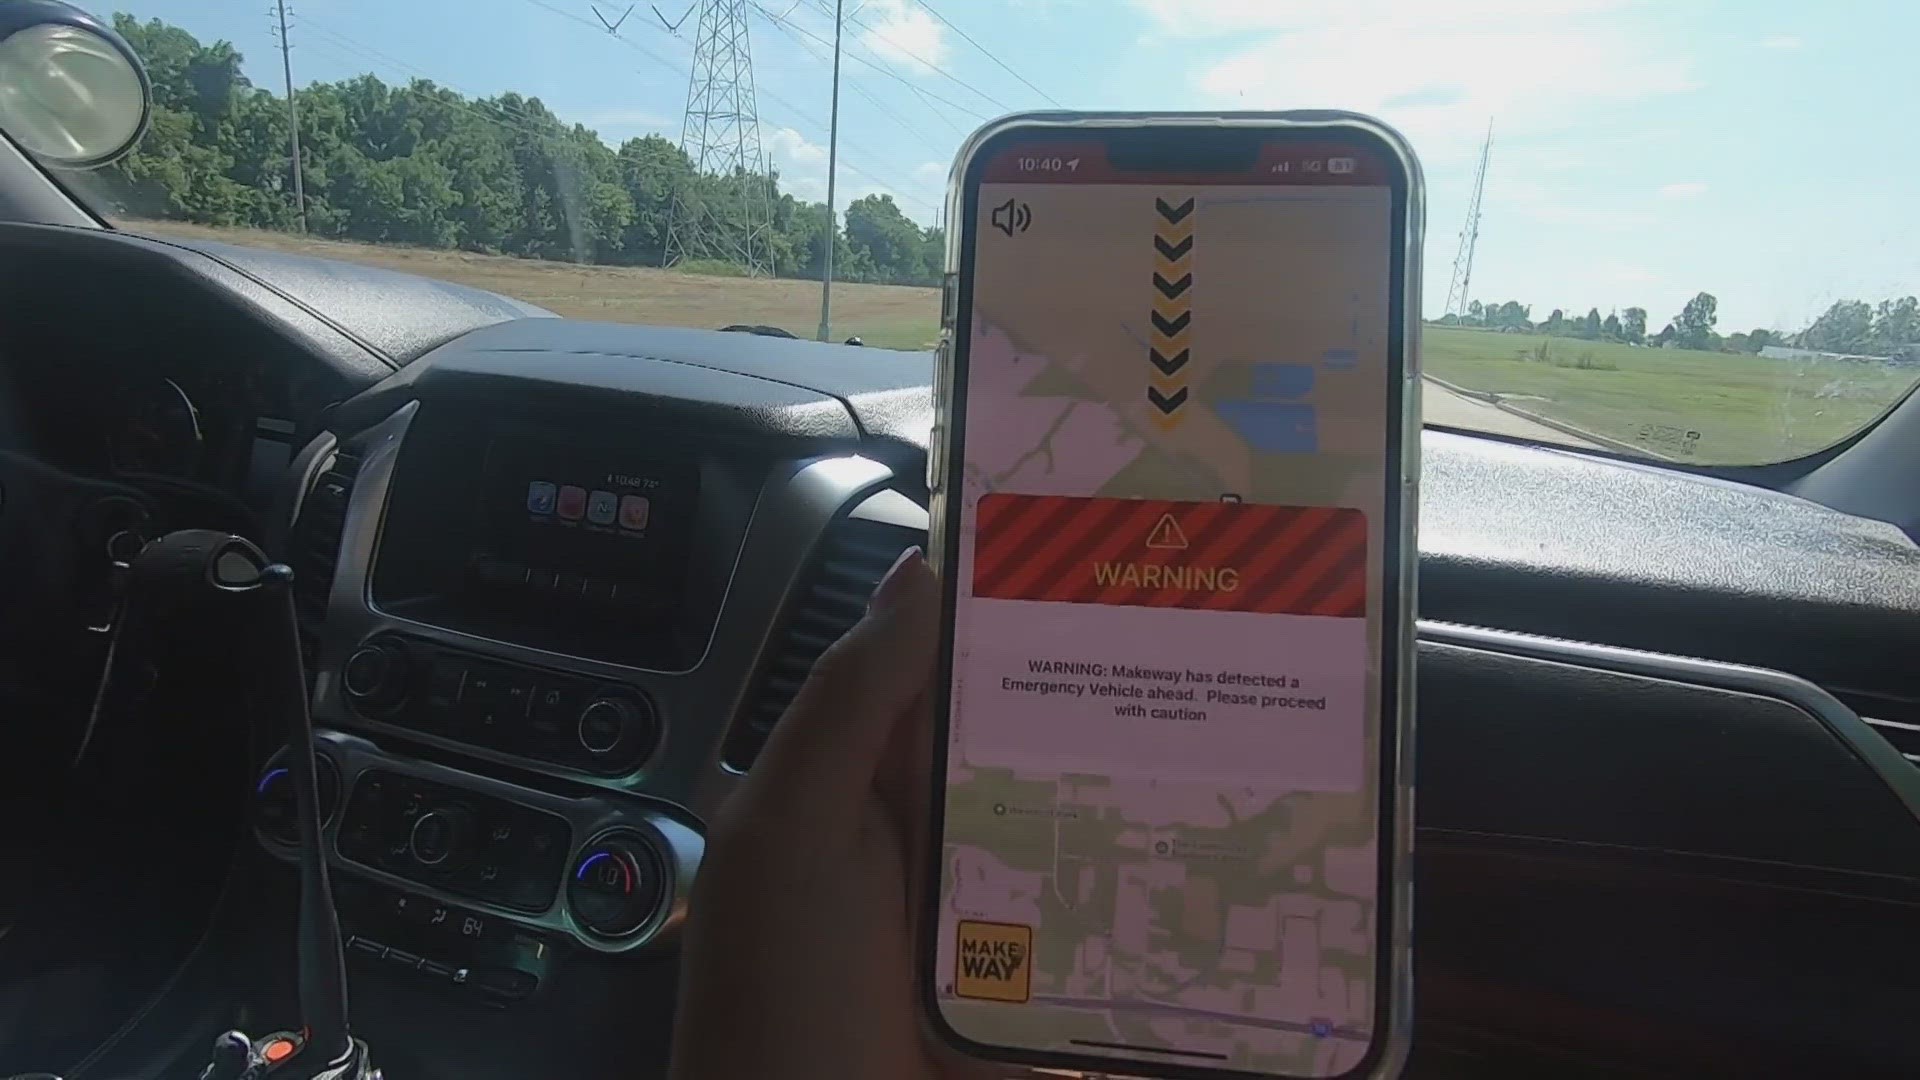 The MakeWay Safety App alerts motorists in the path of an emergency vehicle. It is designed to improve safety on roadways.